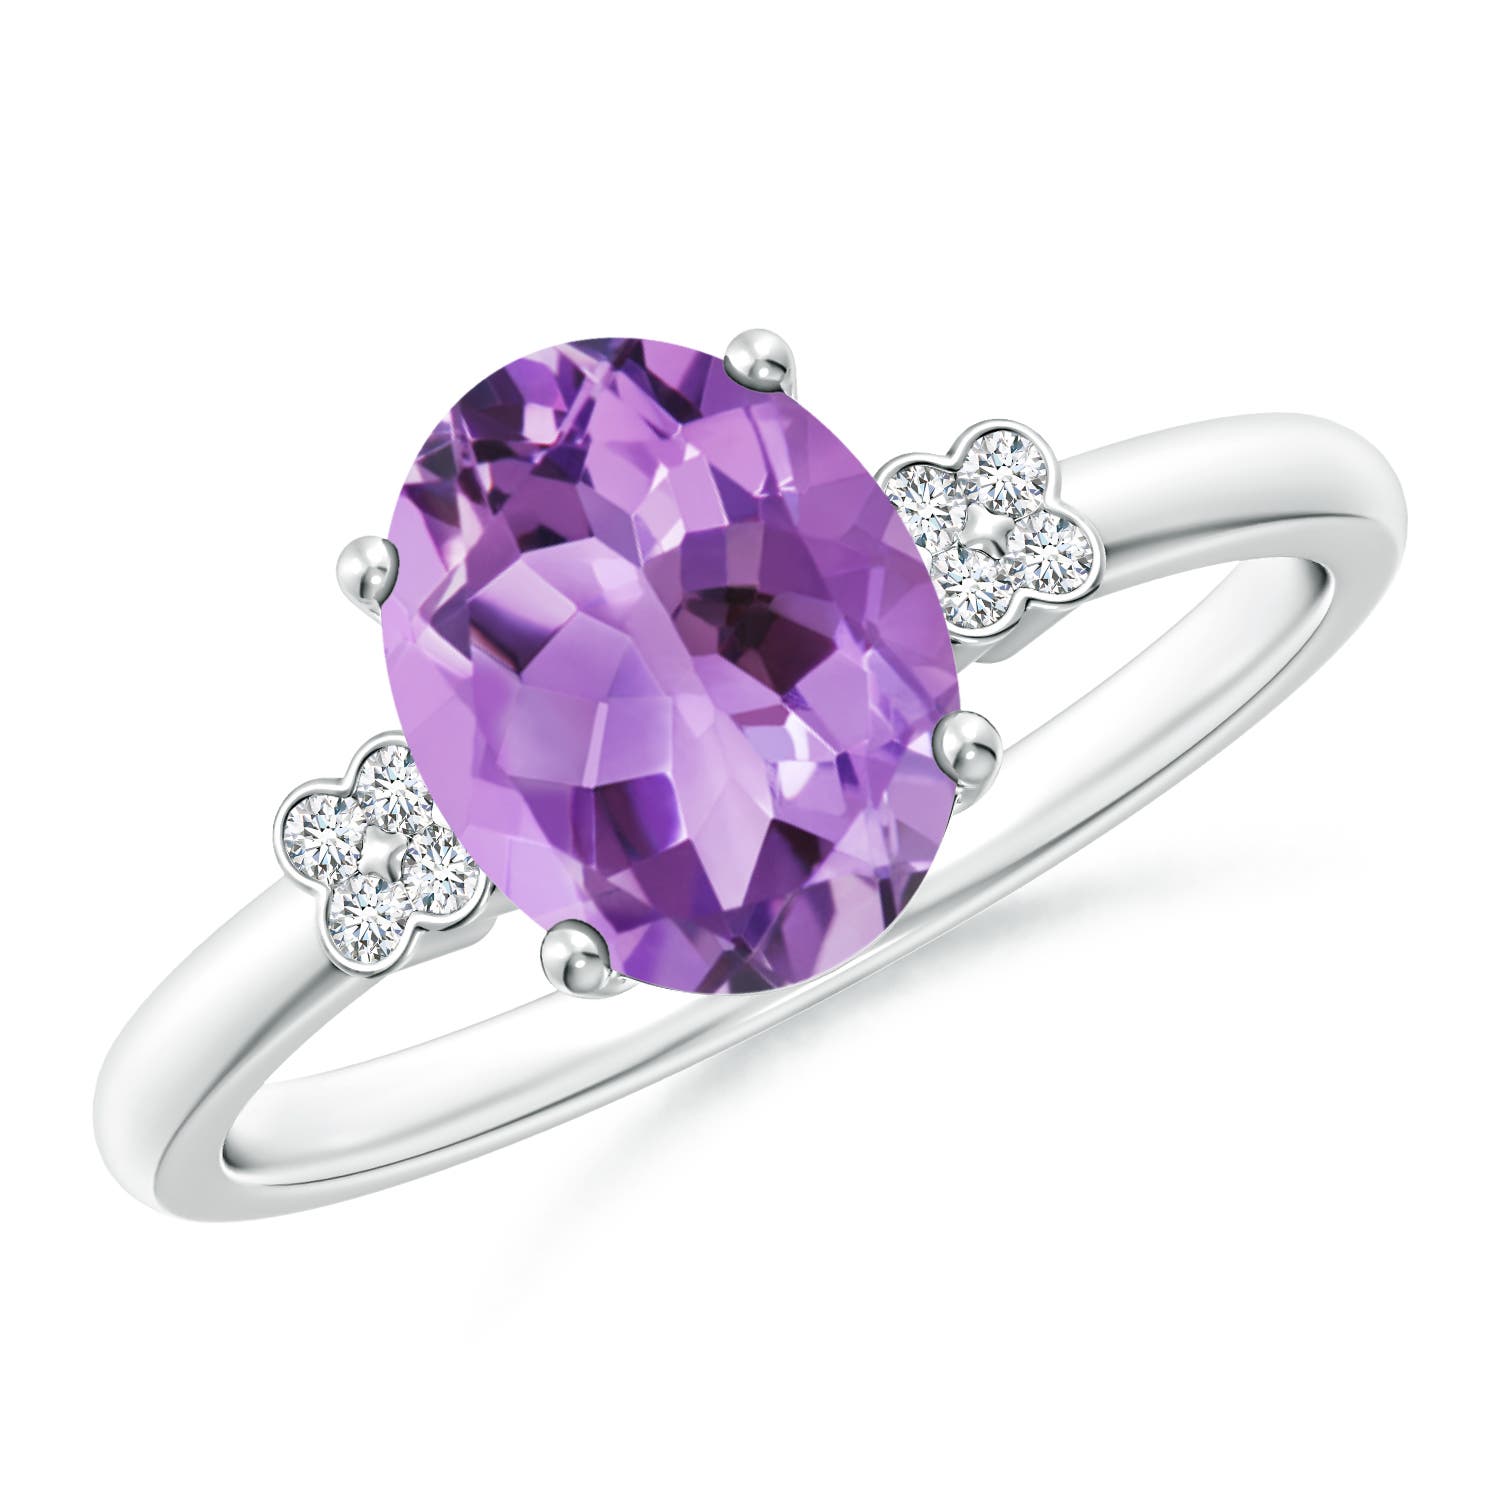 A- Amethyst / 1.66 CT / 14 KT White Gold